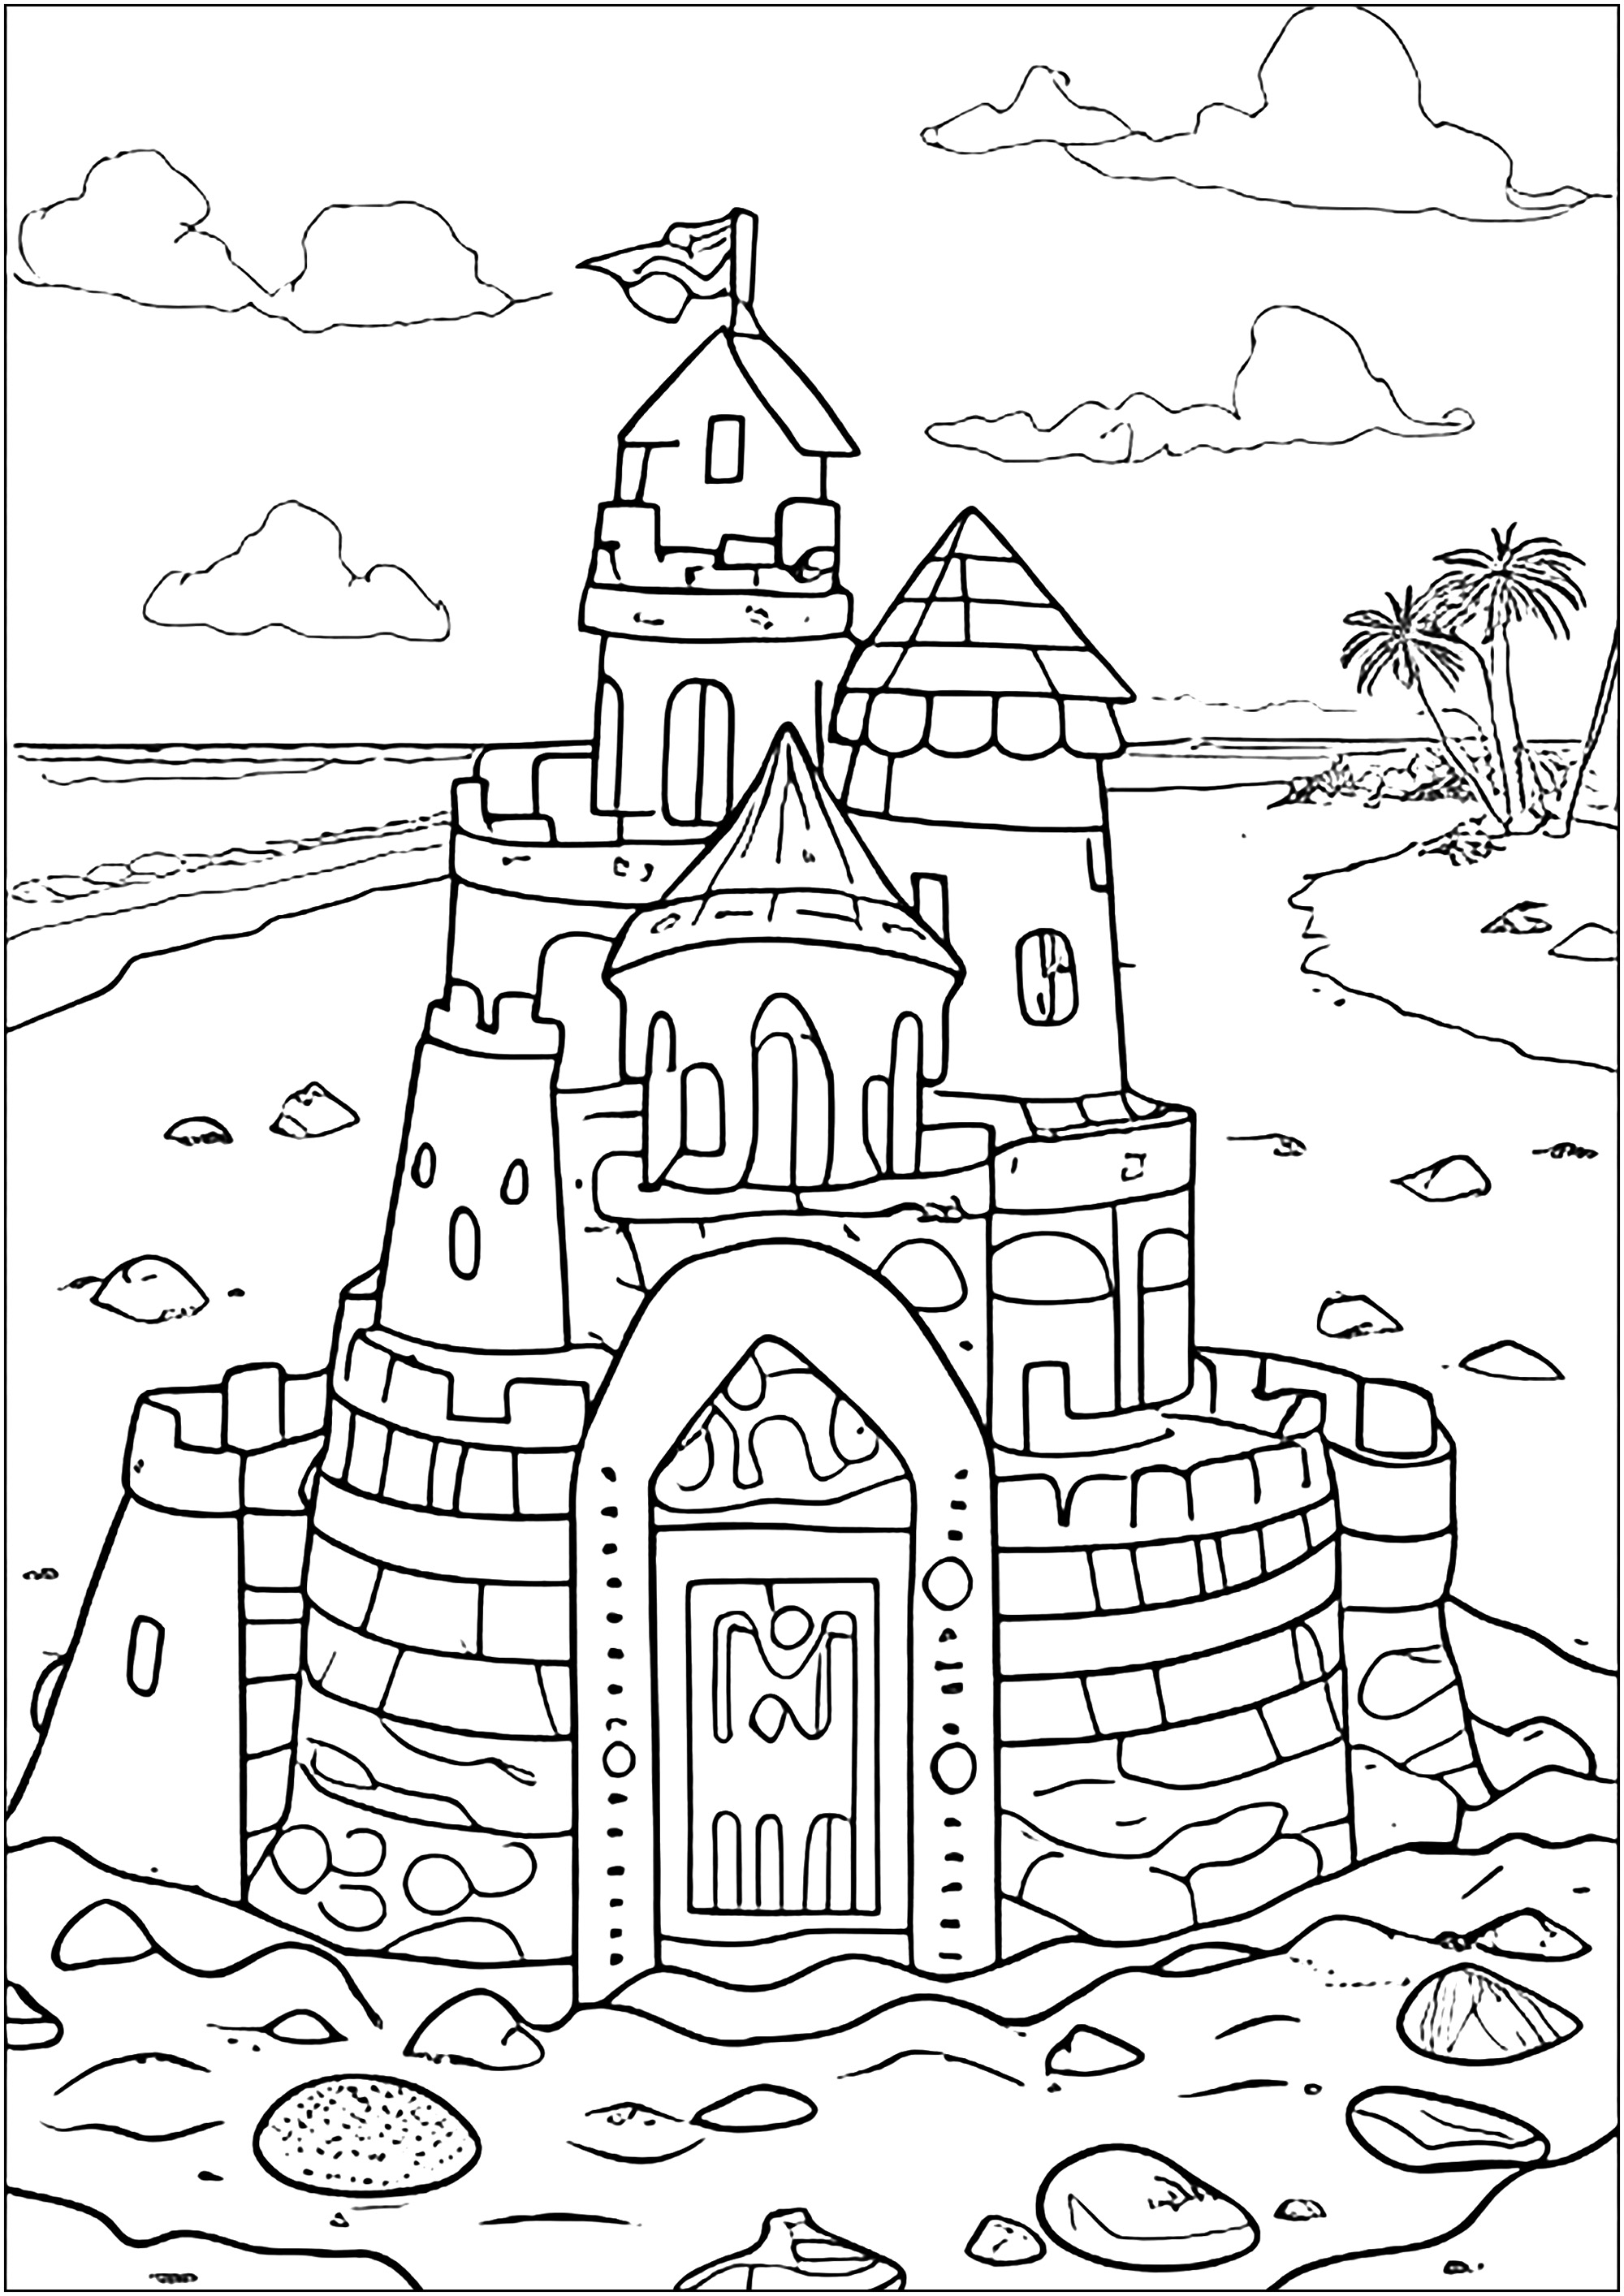 3D sketch of a sand castle by fastestbabloo on DeviantArt